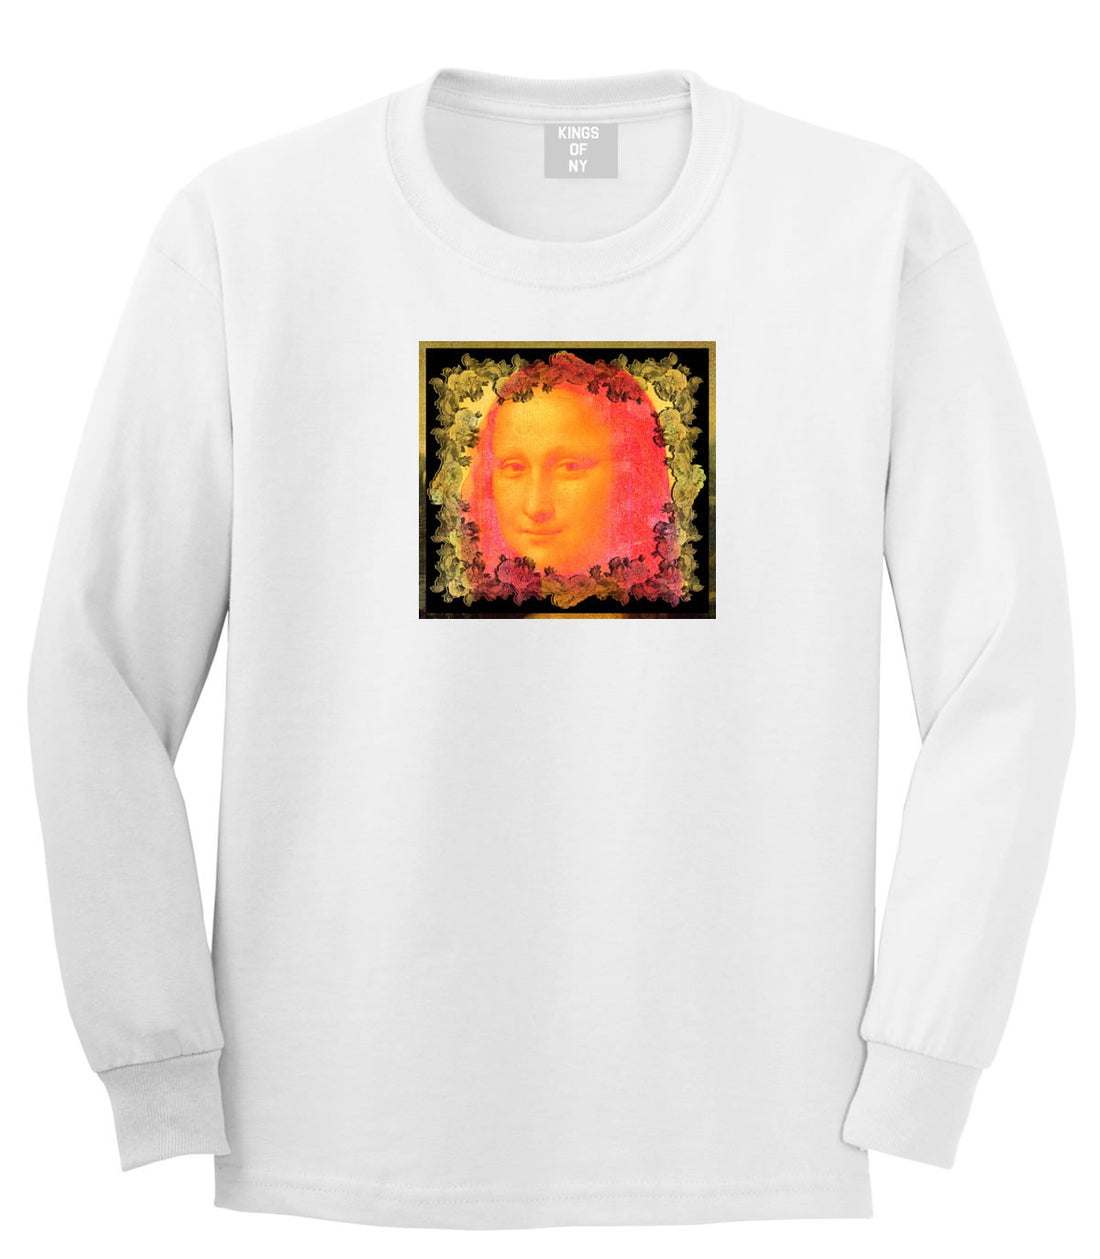 Mona Artwork Art Lisa Wall Painting Long Sleeve T-Shirt in White by Kings Of NY